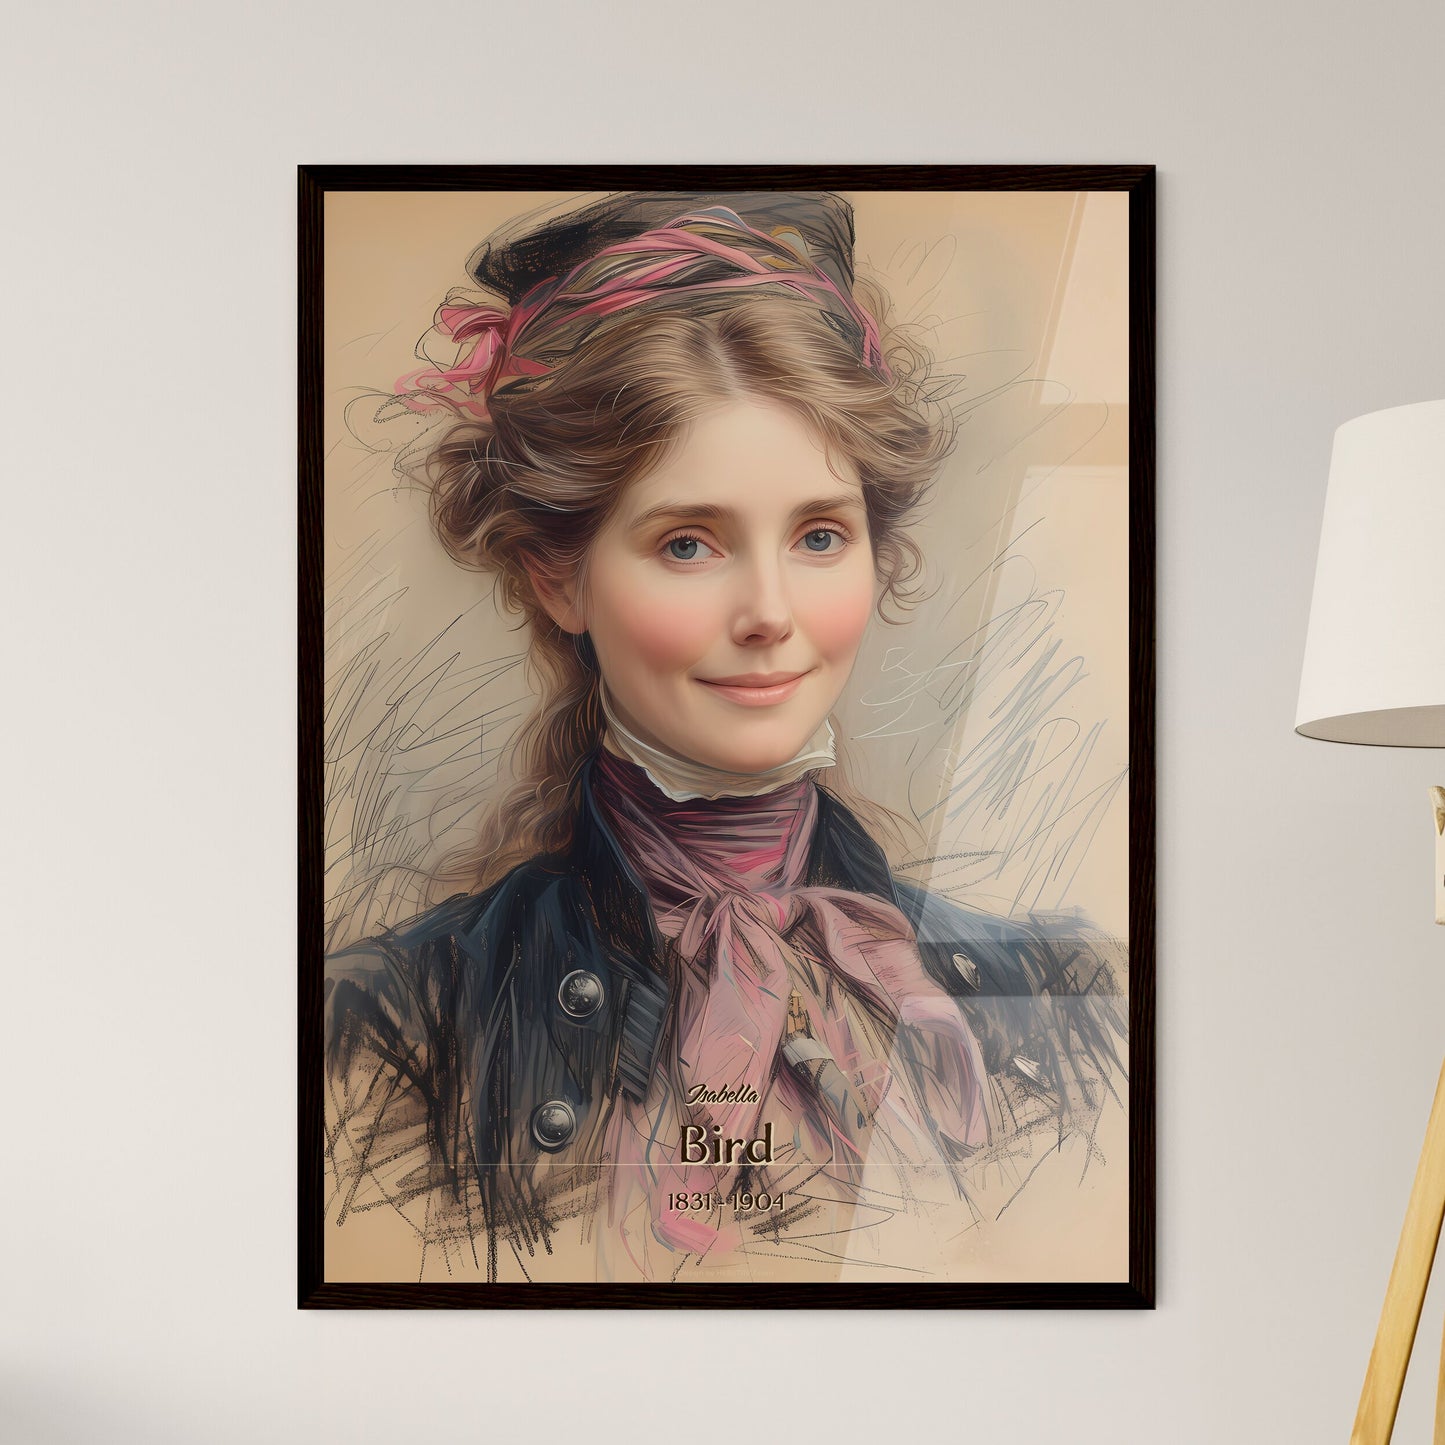 Isabella, Bird, 1831 - 1904, A Poster of a woman with a pink bow in her hair Default Title